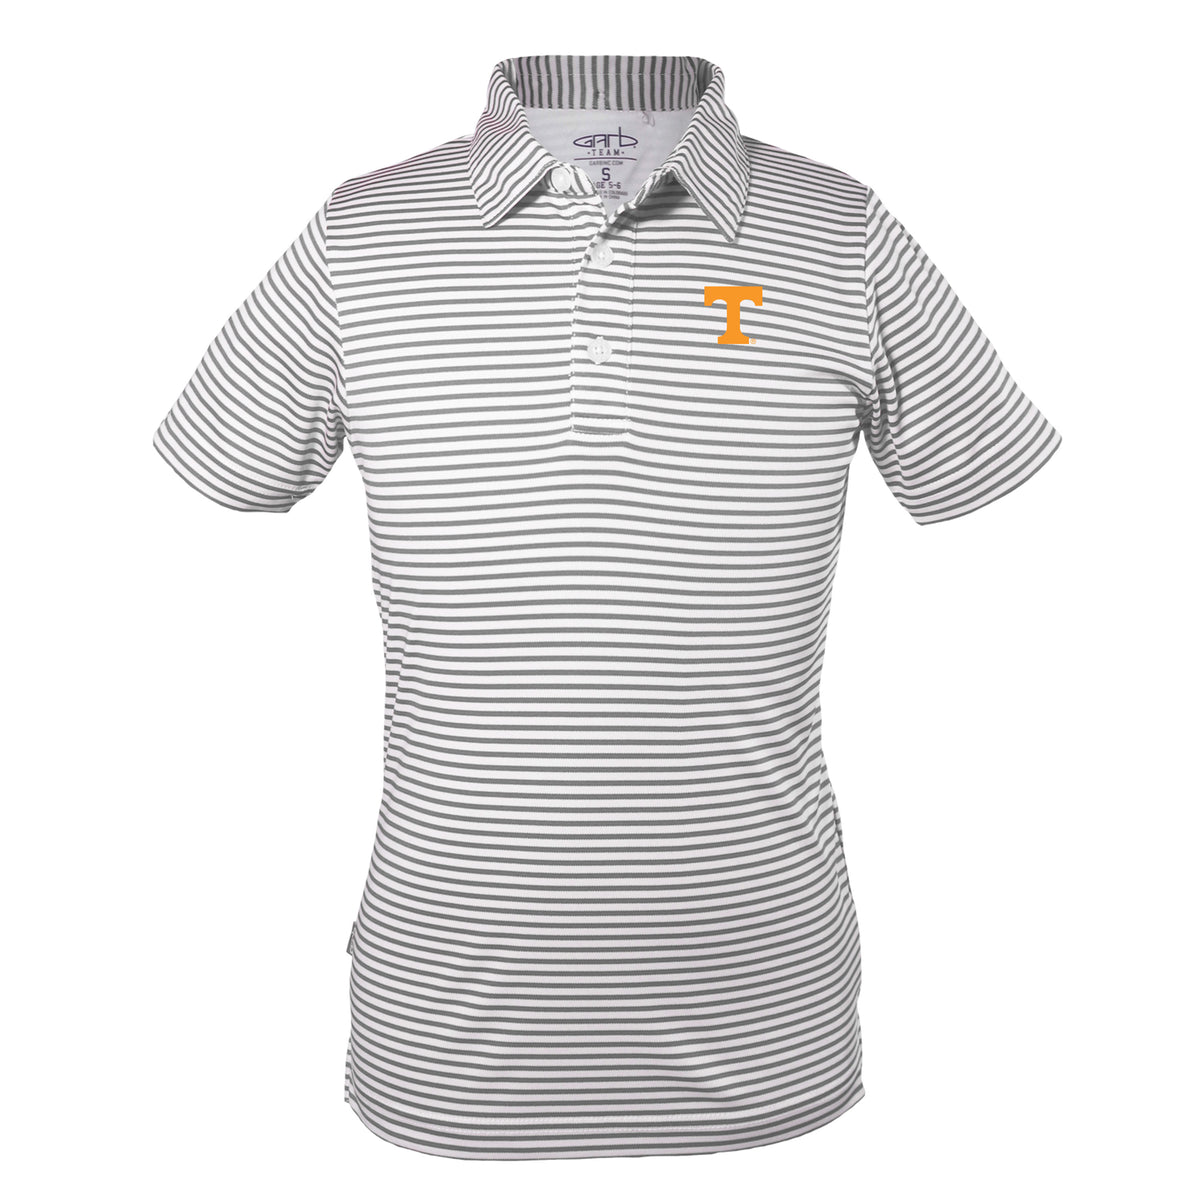 Tennessee State Tigers Youth Boys' Polo